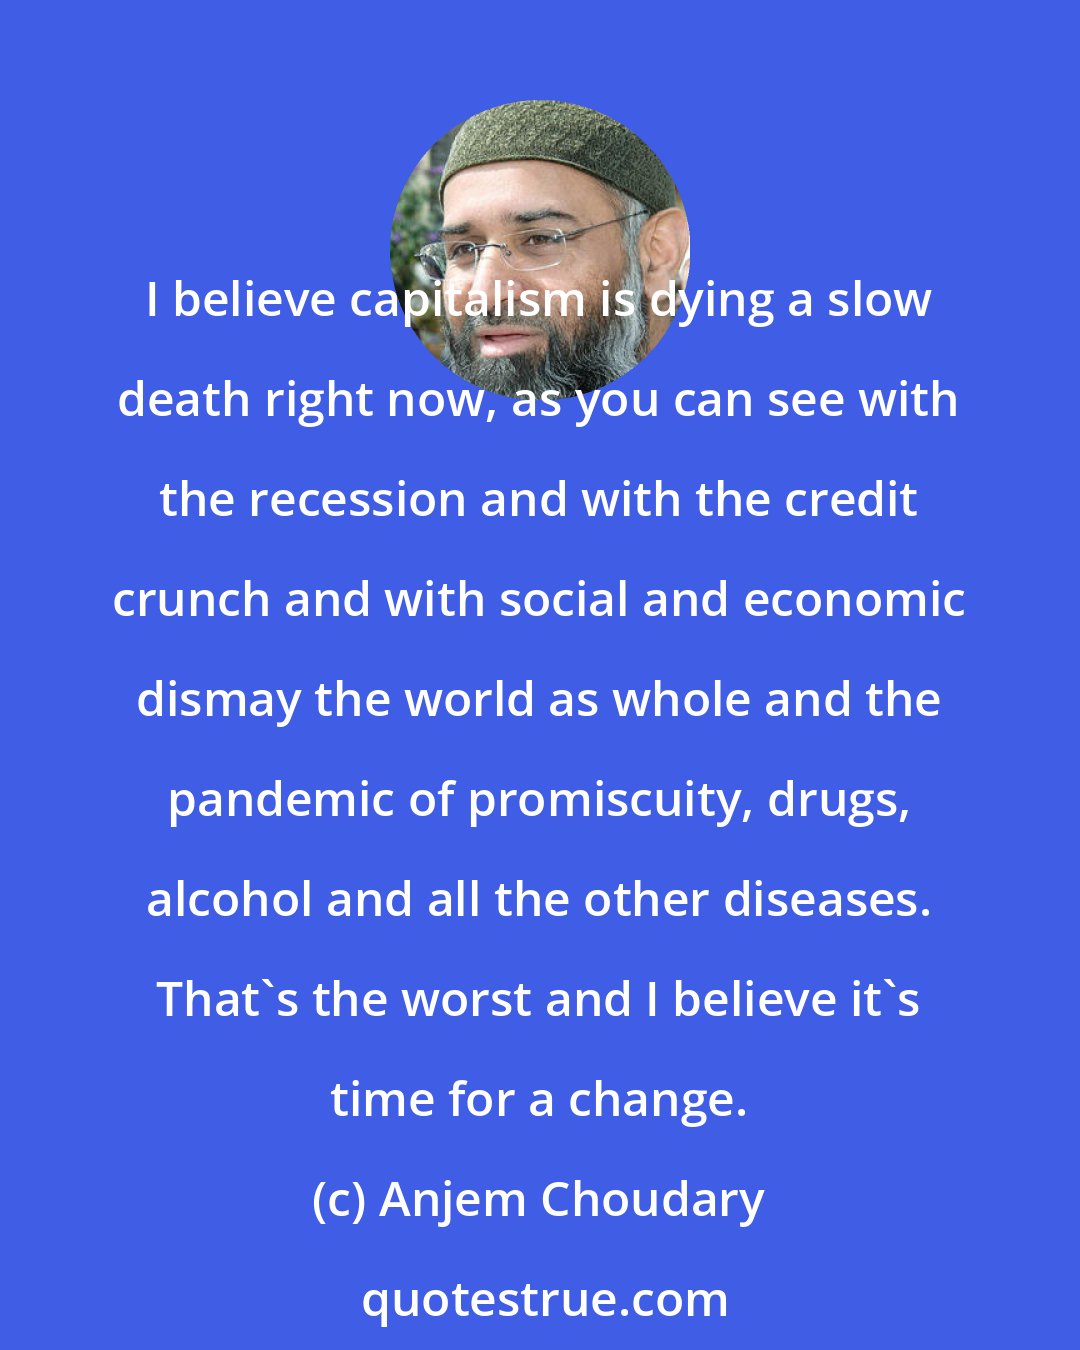 Anjem Choudary: I believe capitalism is dying a slow death right now, as you can see with the recession and with the credit crunch and with social and economic dismay the world as whole and the pandemic of promiscuity, drugs, alcohol and all the other diseases. That's the worst and I believe it's time for a change.